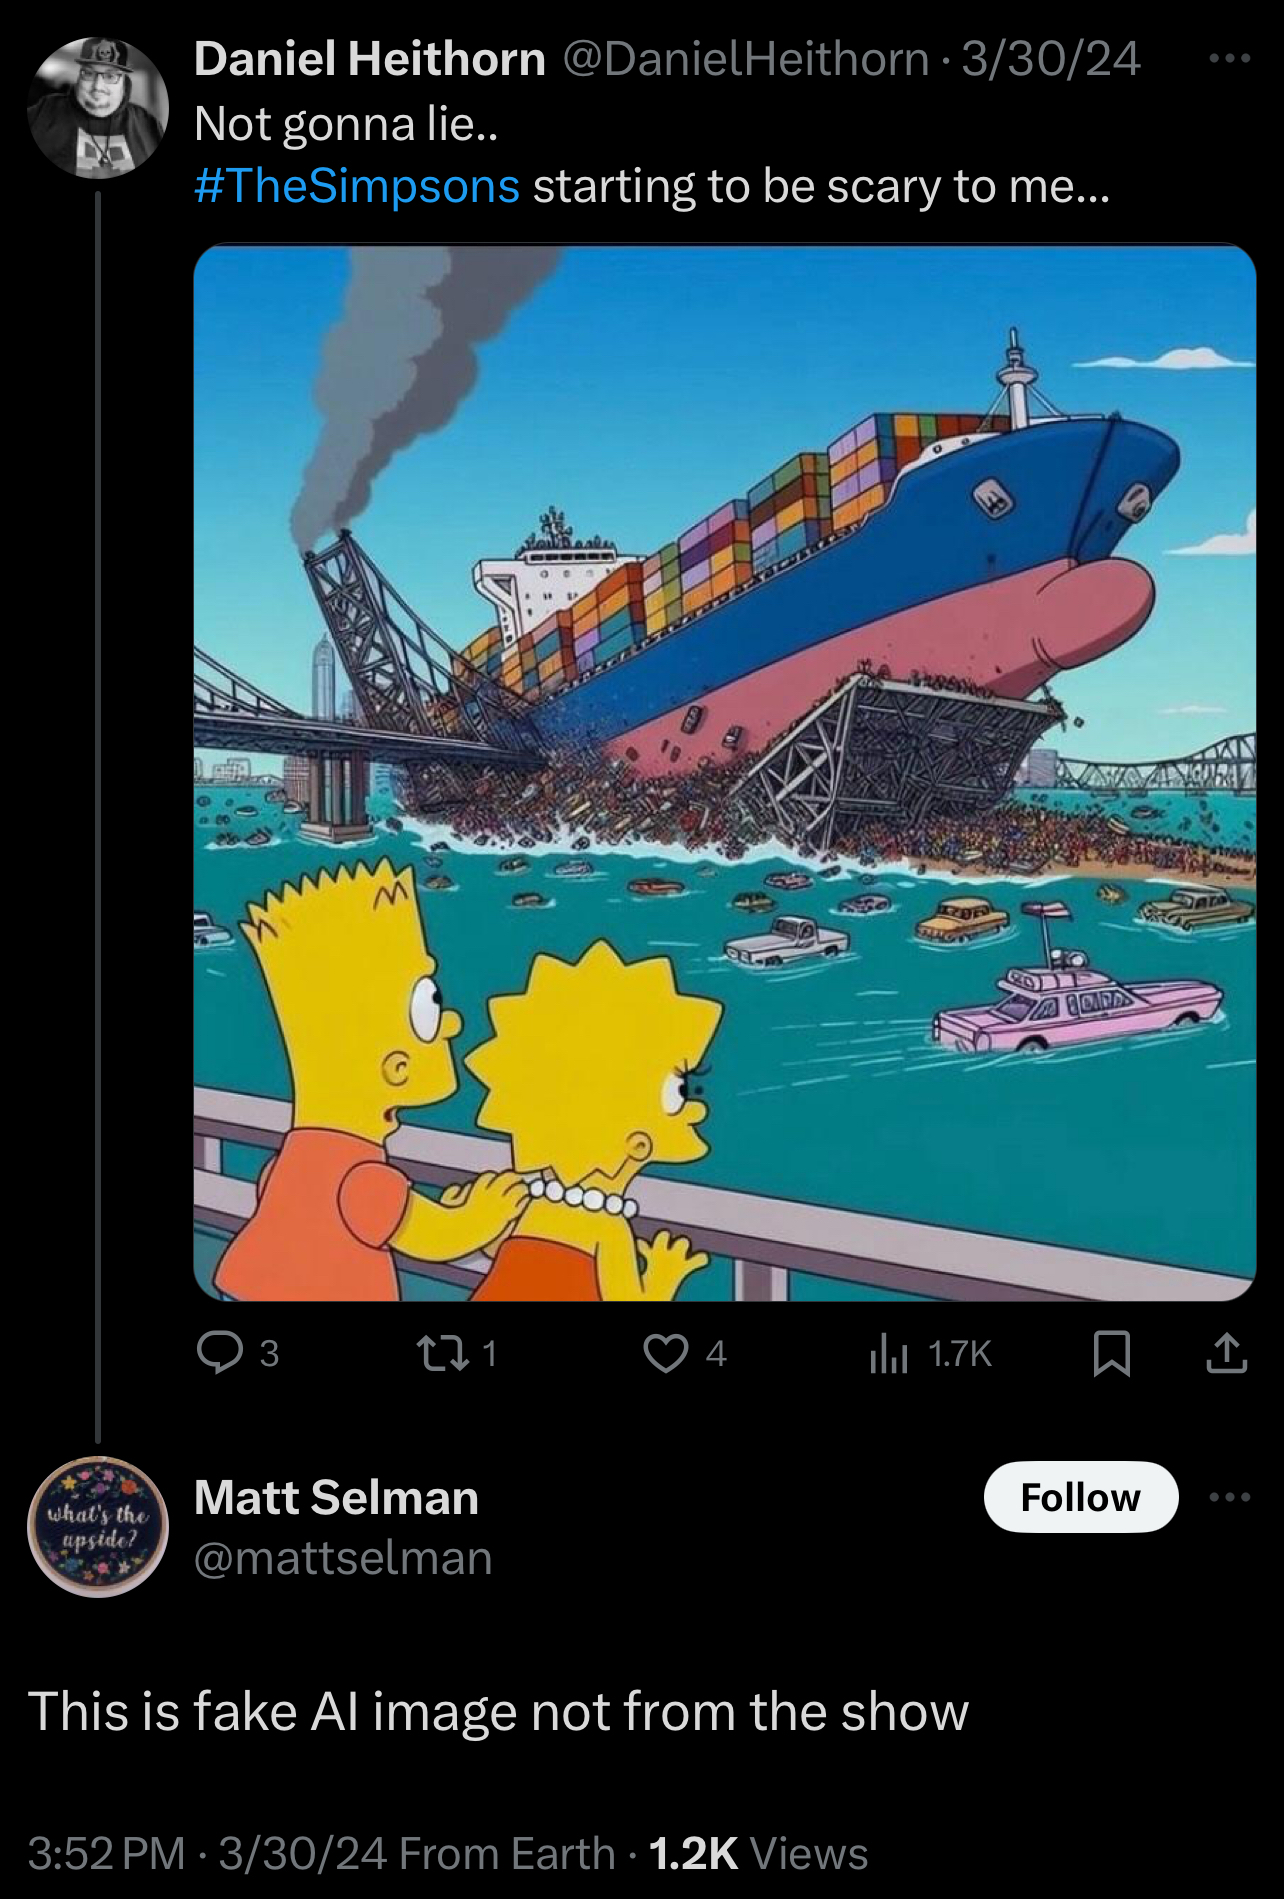 A tweet from Daniel Heithorn showing a cartoon with a ship crashing into a bridge, saying &quot;#TheSimpsons starting to be scary to me...&quot;. Matt Selman replies, &quot;This is fake AI image not from the show&quot;